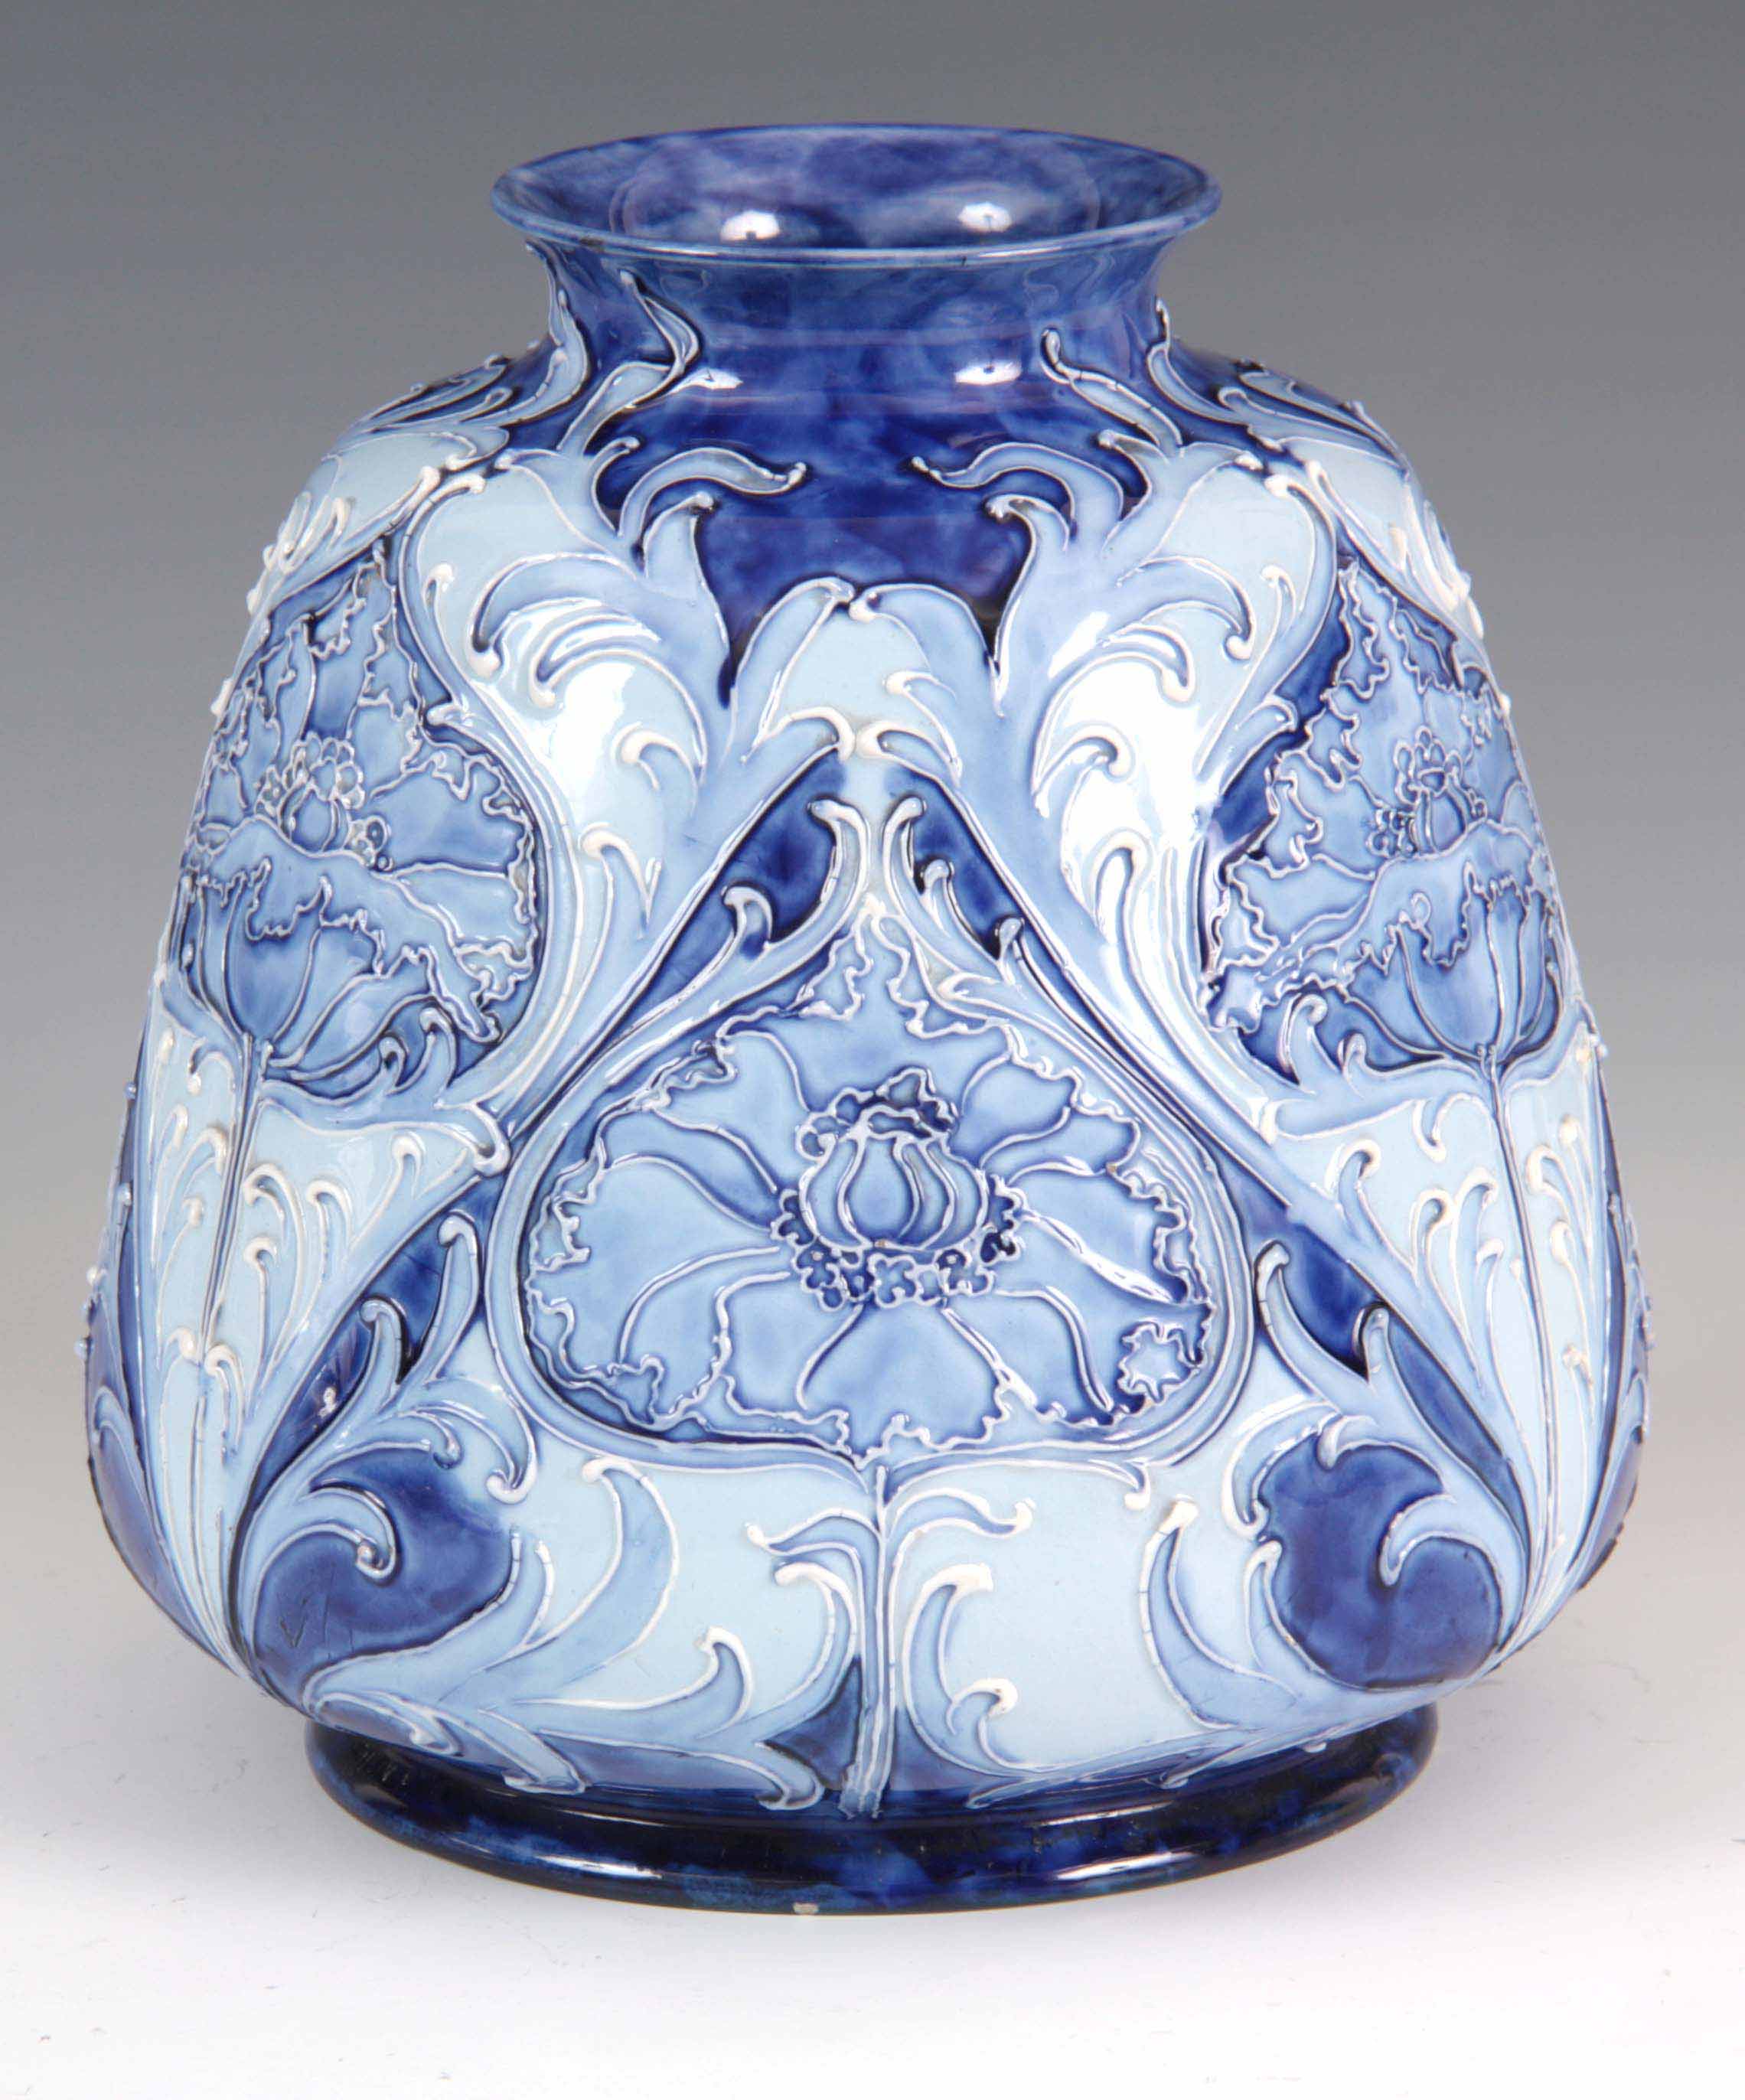 A FLORIAN WARE MOORCROFT VASE with stylised piped floral decoration with a printed label for '